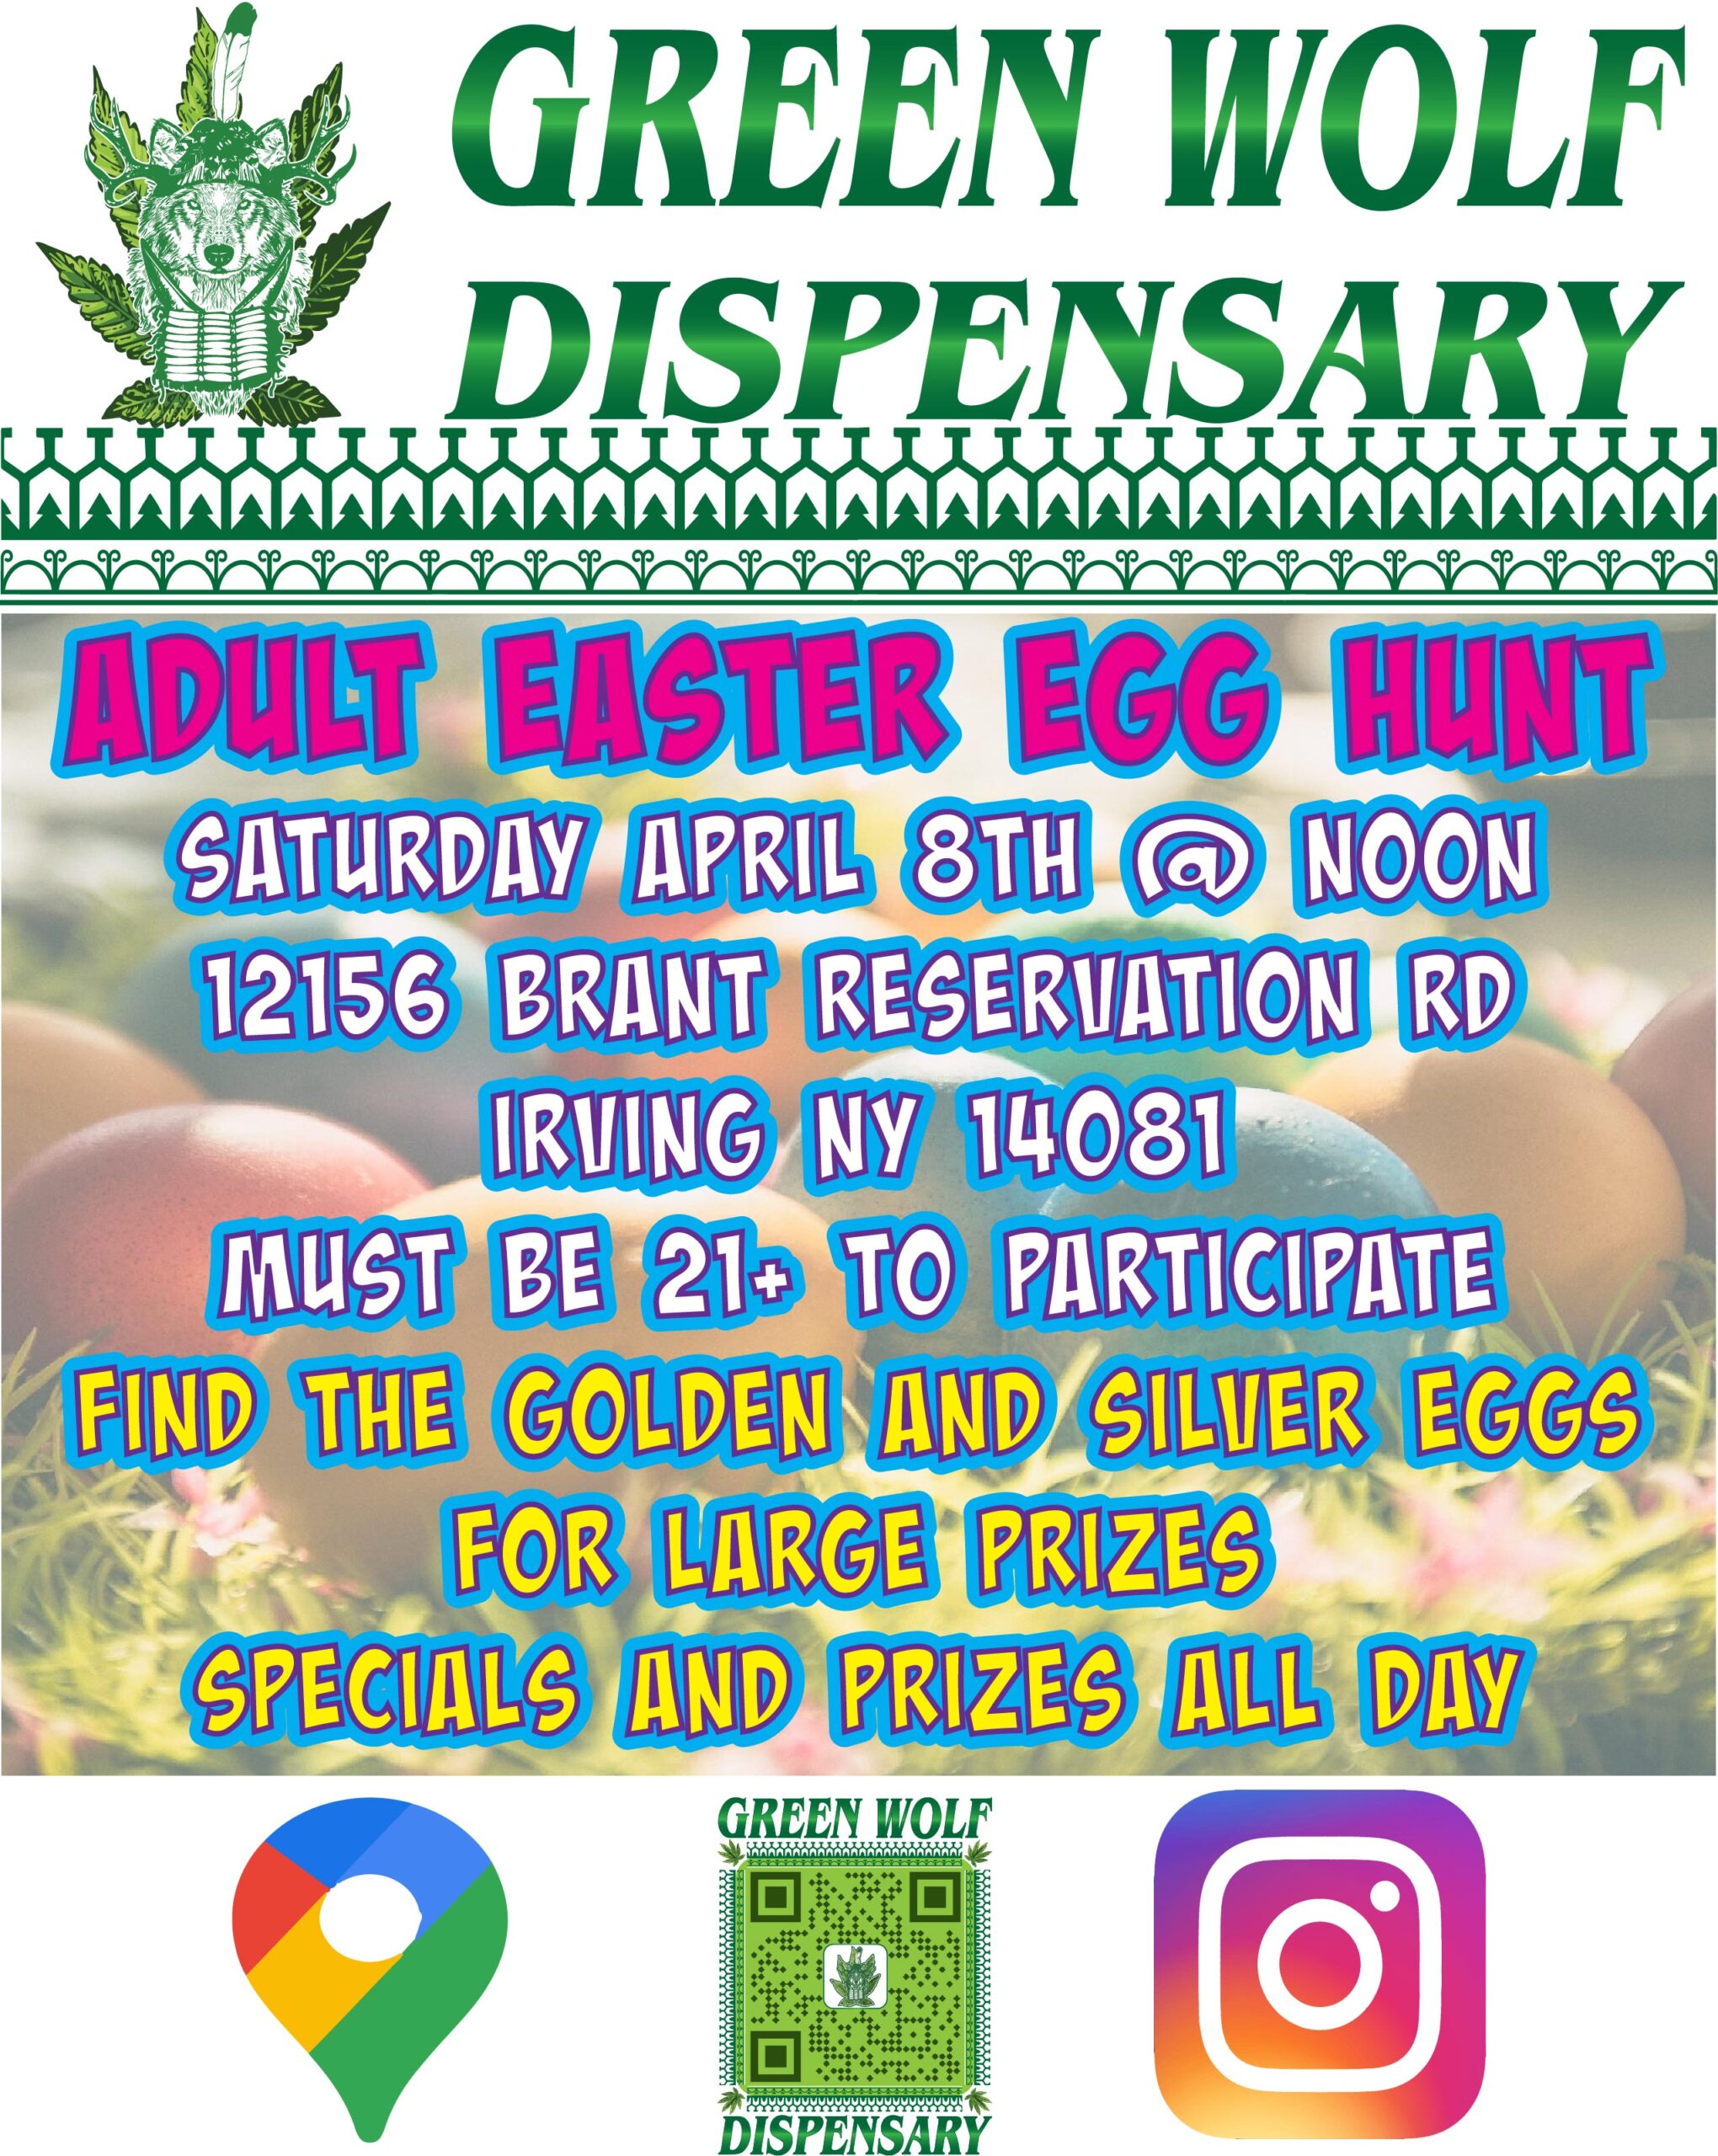 Green Wolf Dispensaries "Adult Easter Egg Hunt" Puff Board